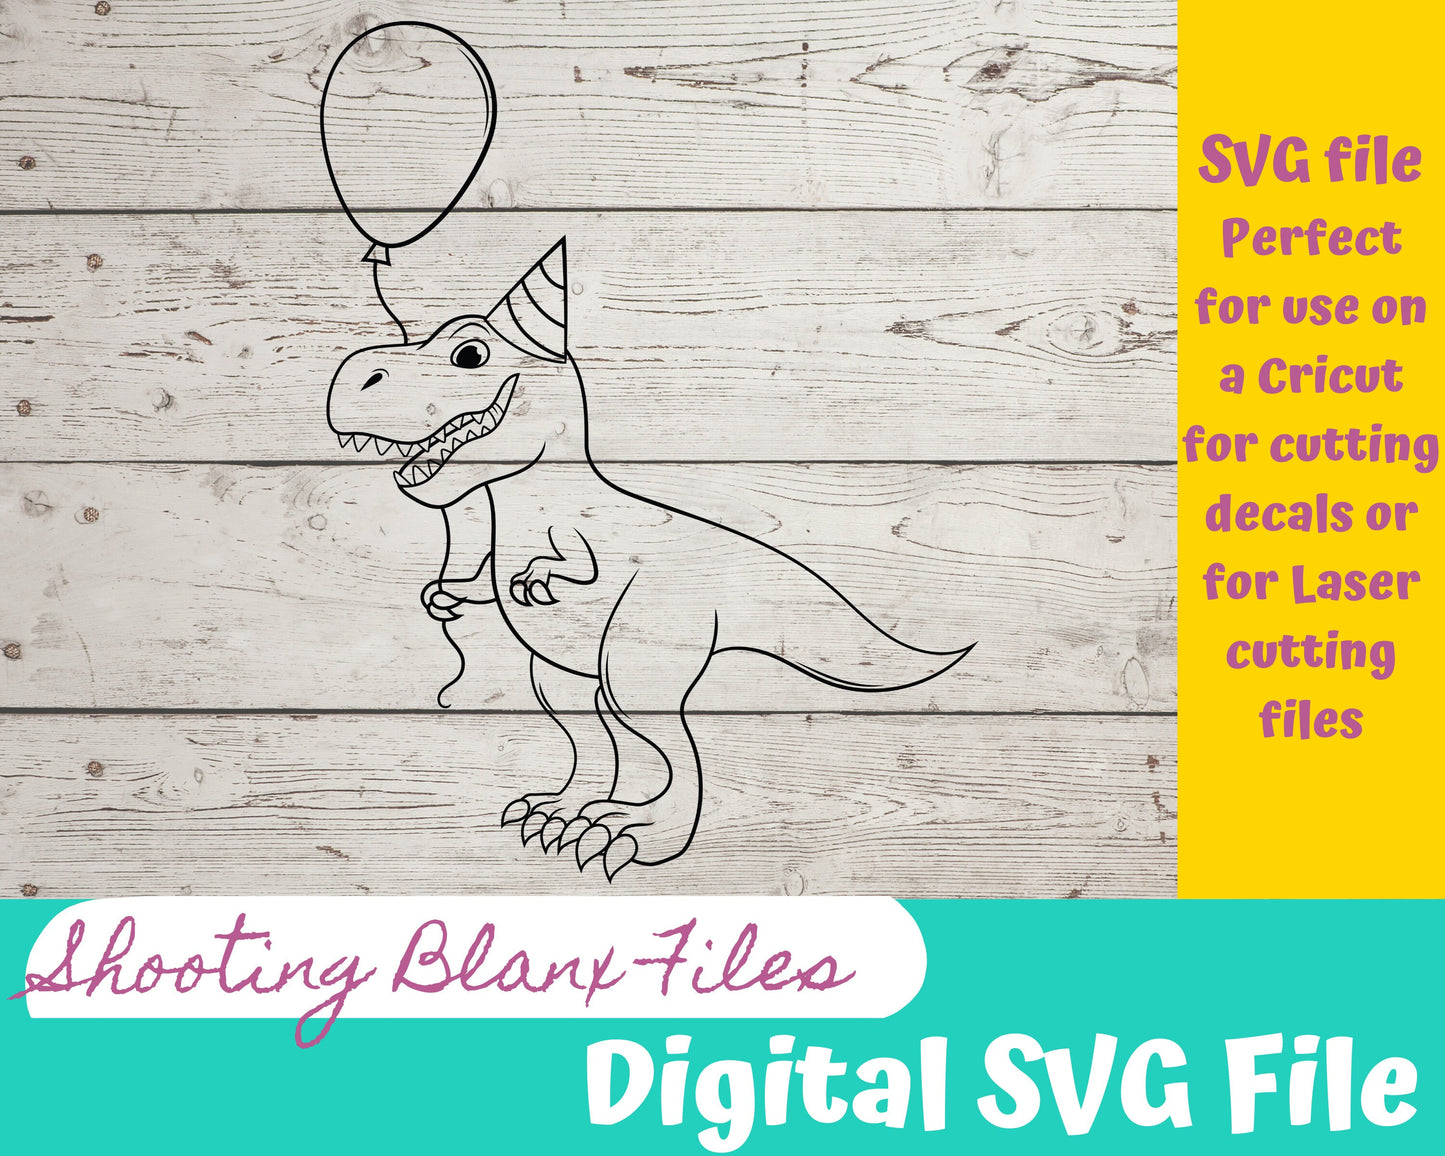 T-rex Dino Birthday SVG files perfect for Cricut, Cameo, or Silhouette also for laser engraving Glowforge, Jurassic, Ice Age, sort arms